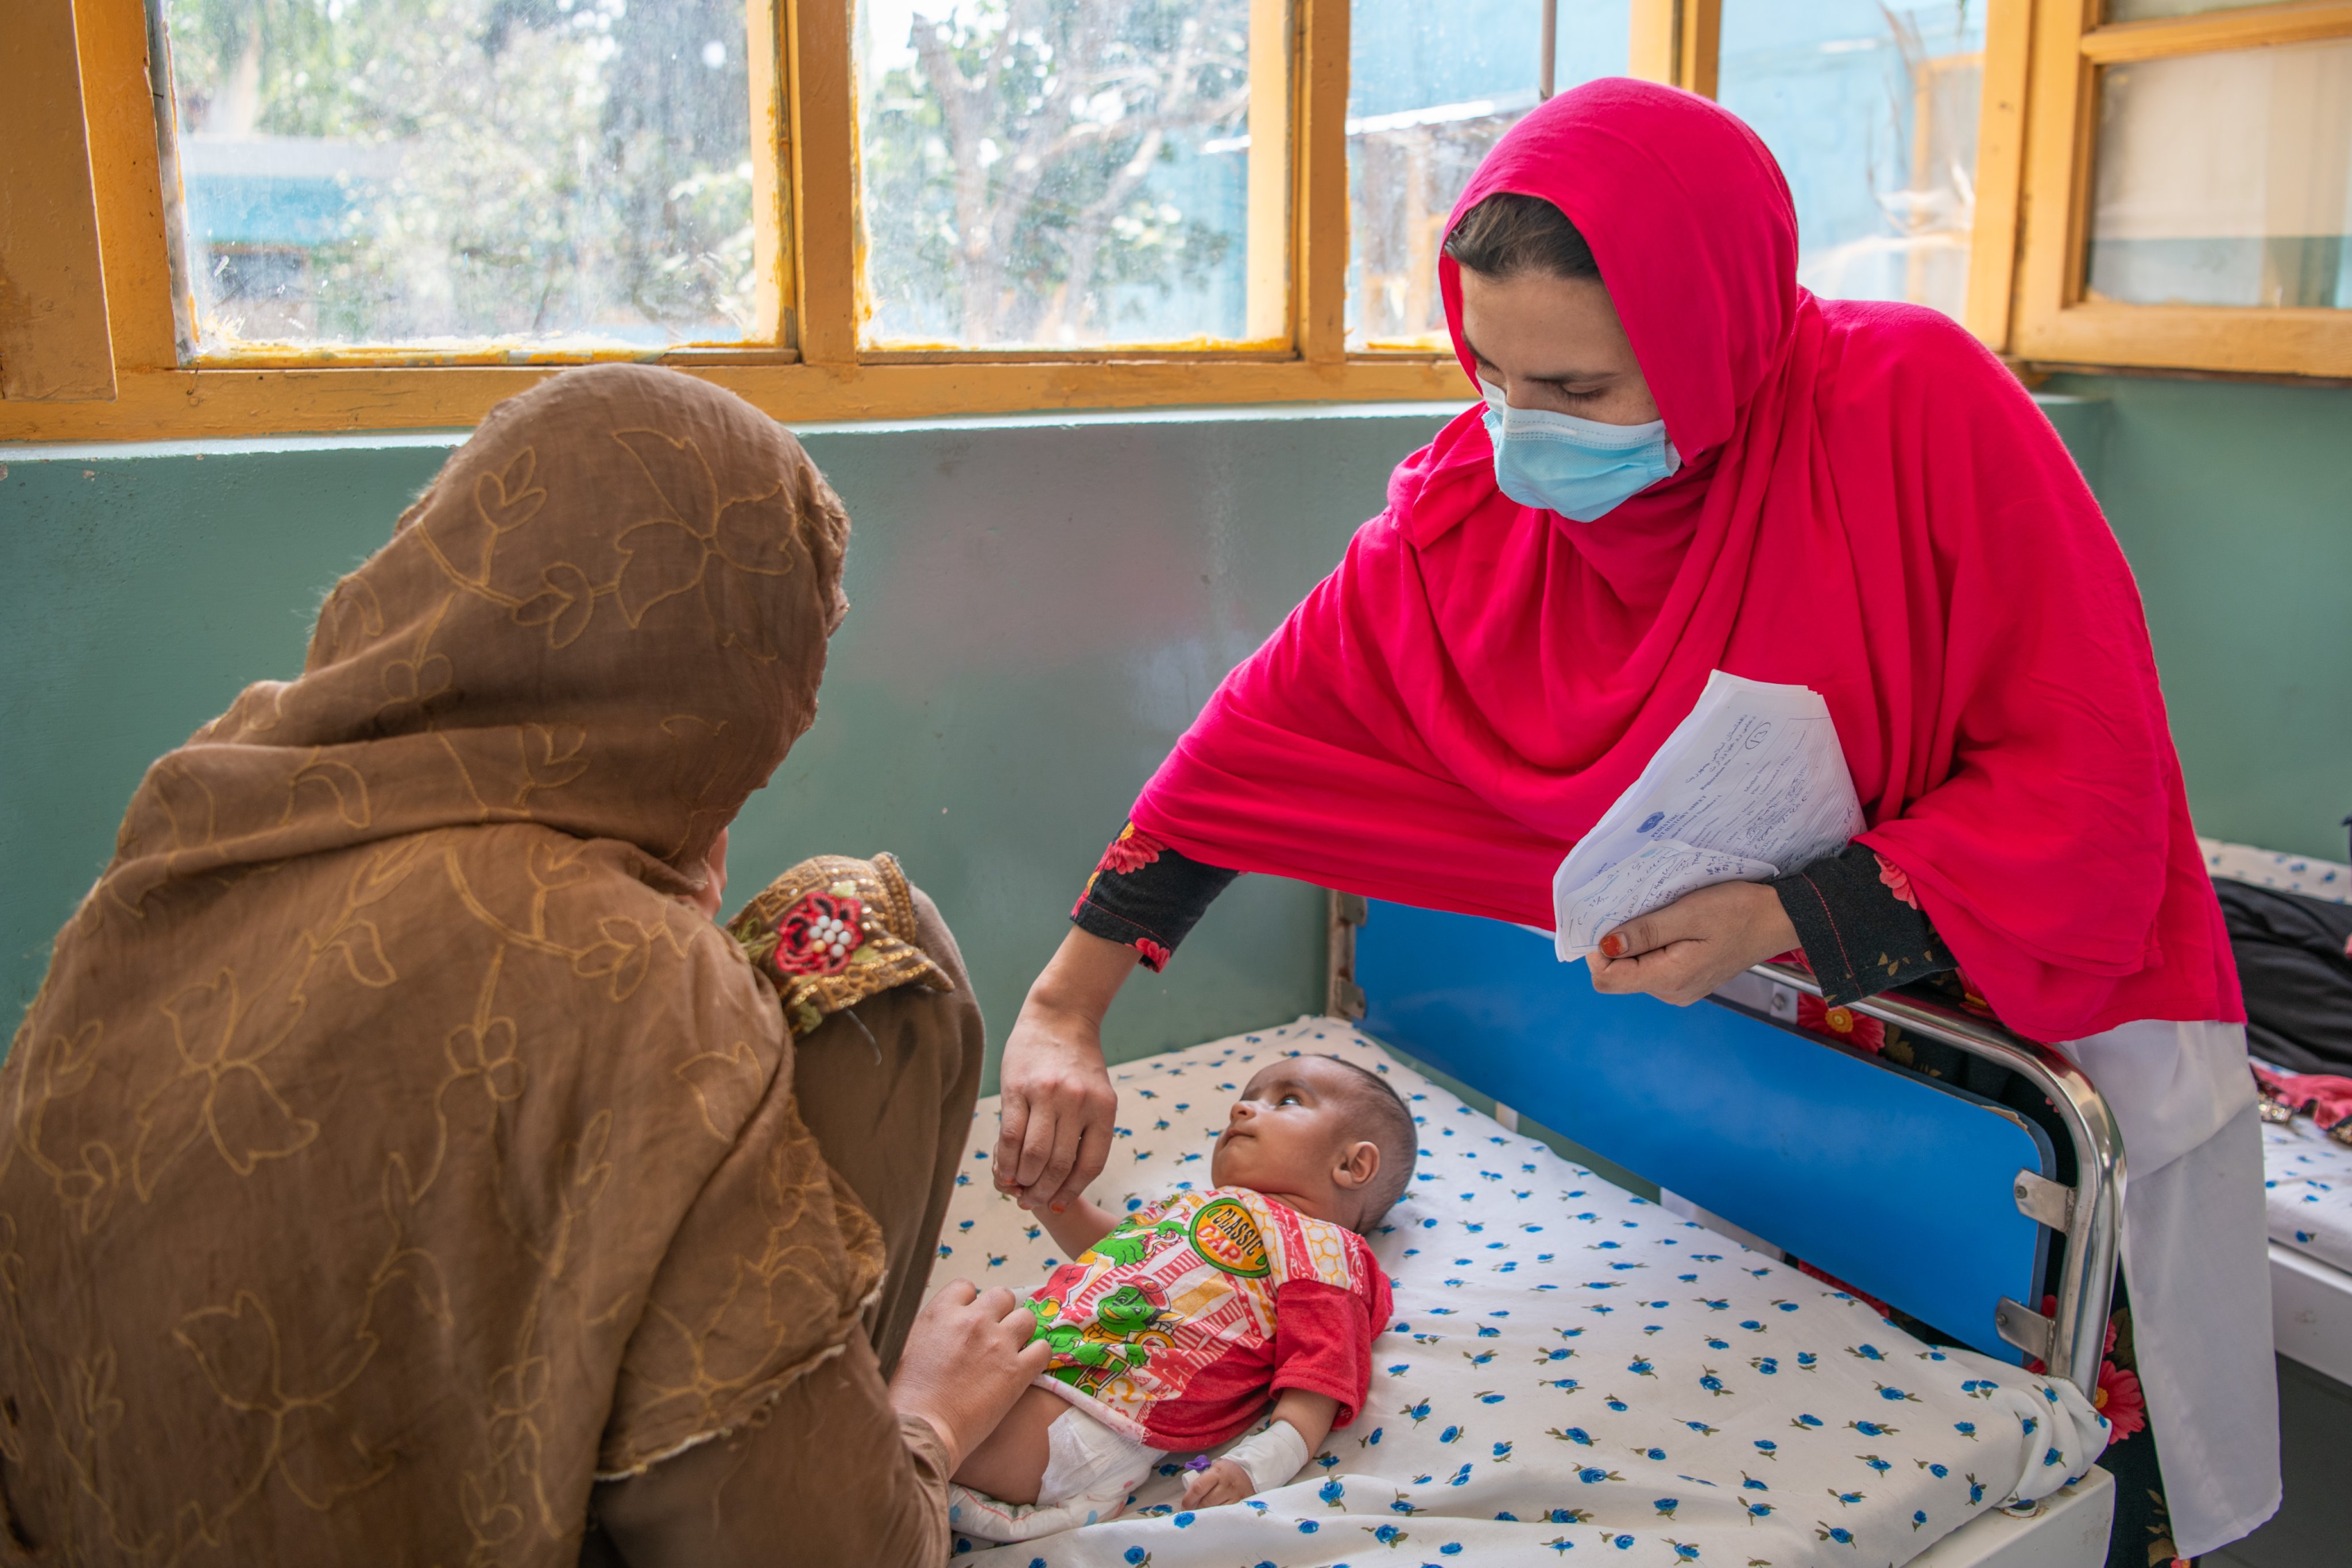 19m Afghans receive life-saving health, nutrition services